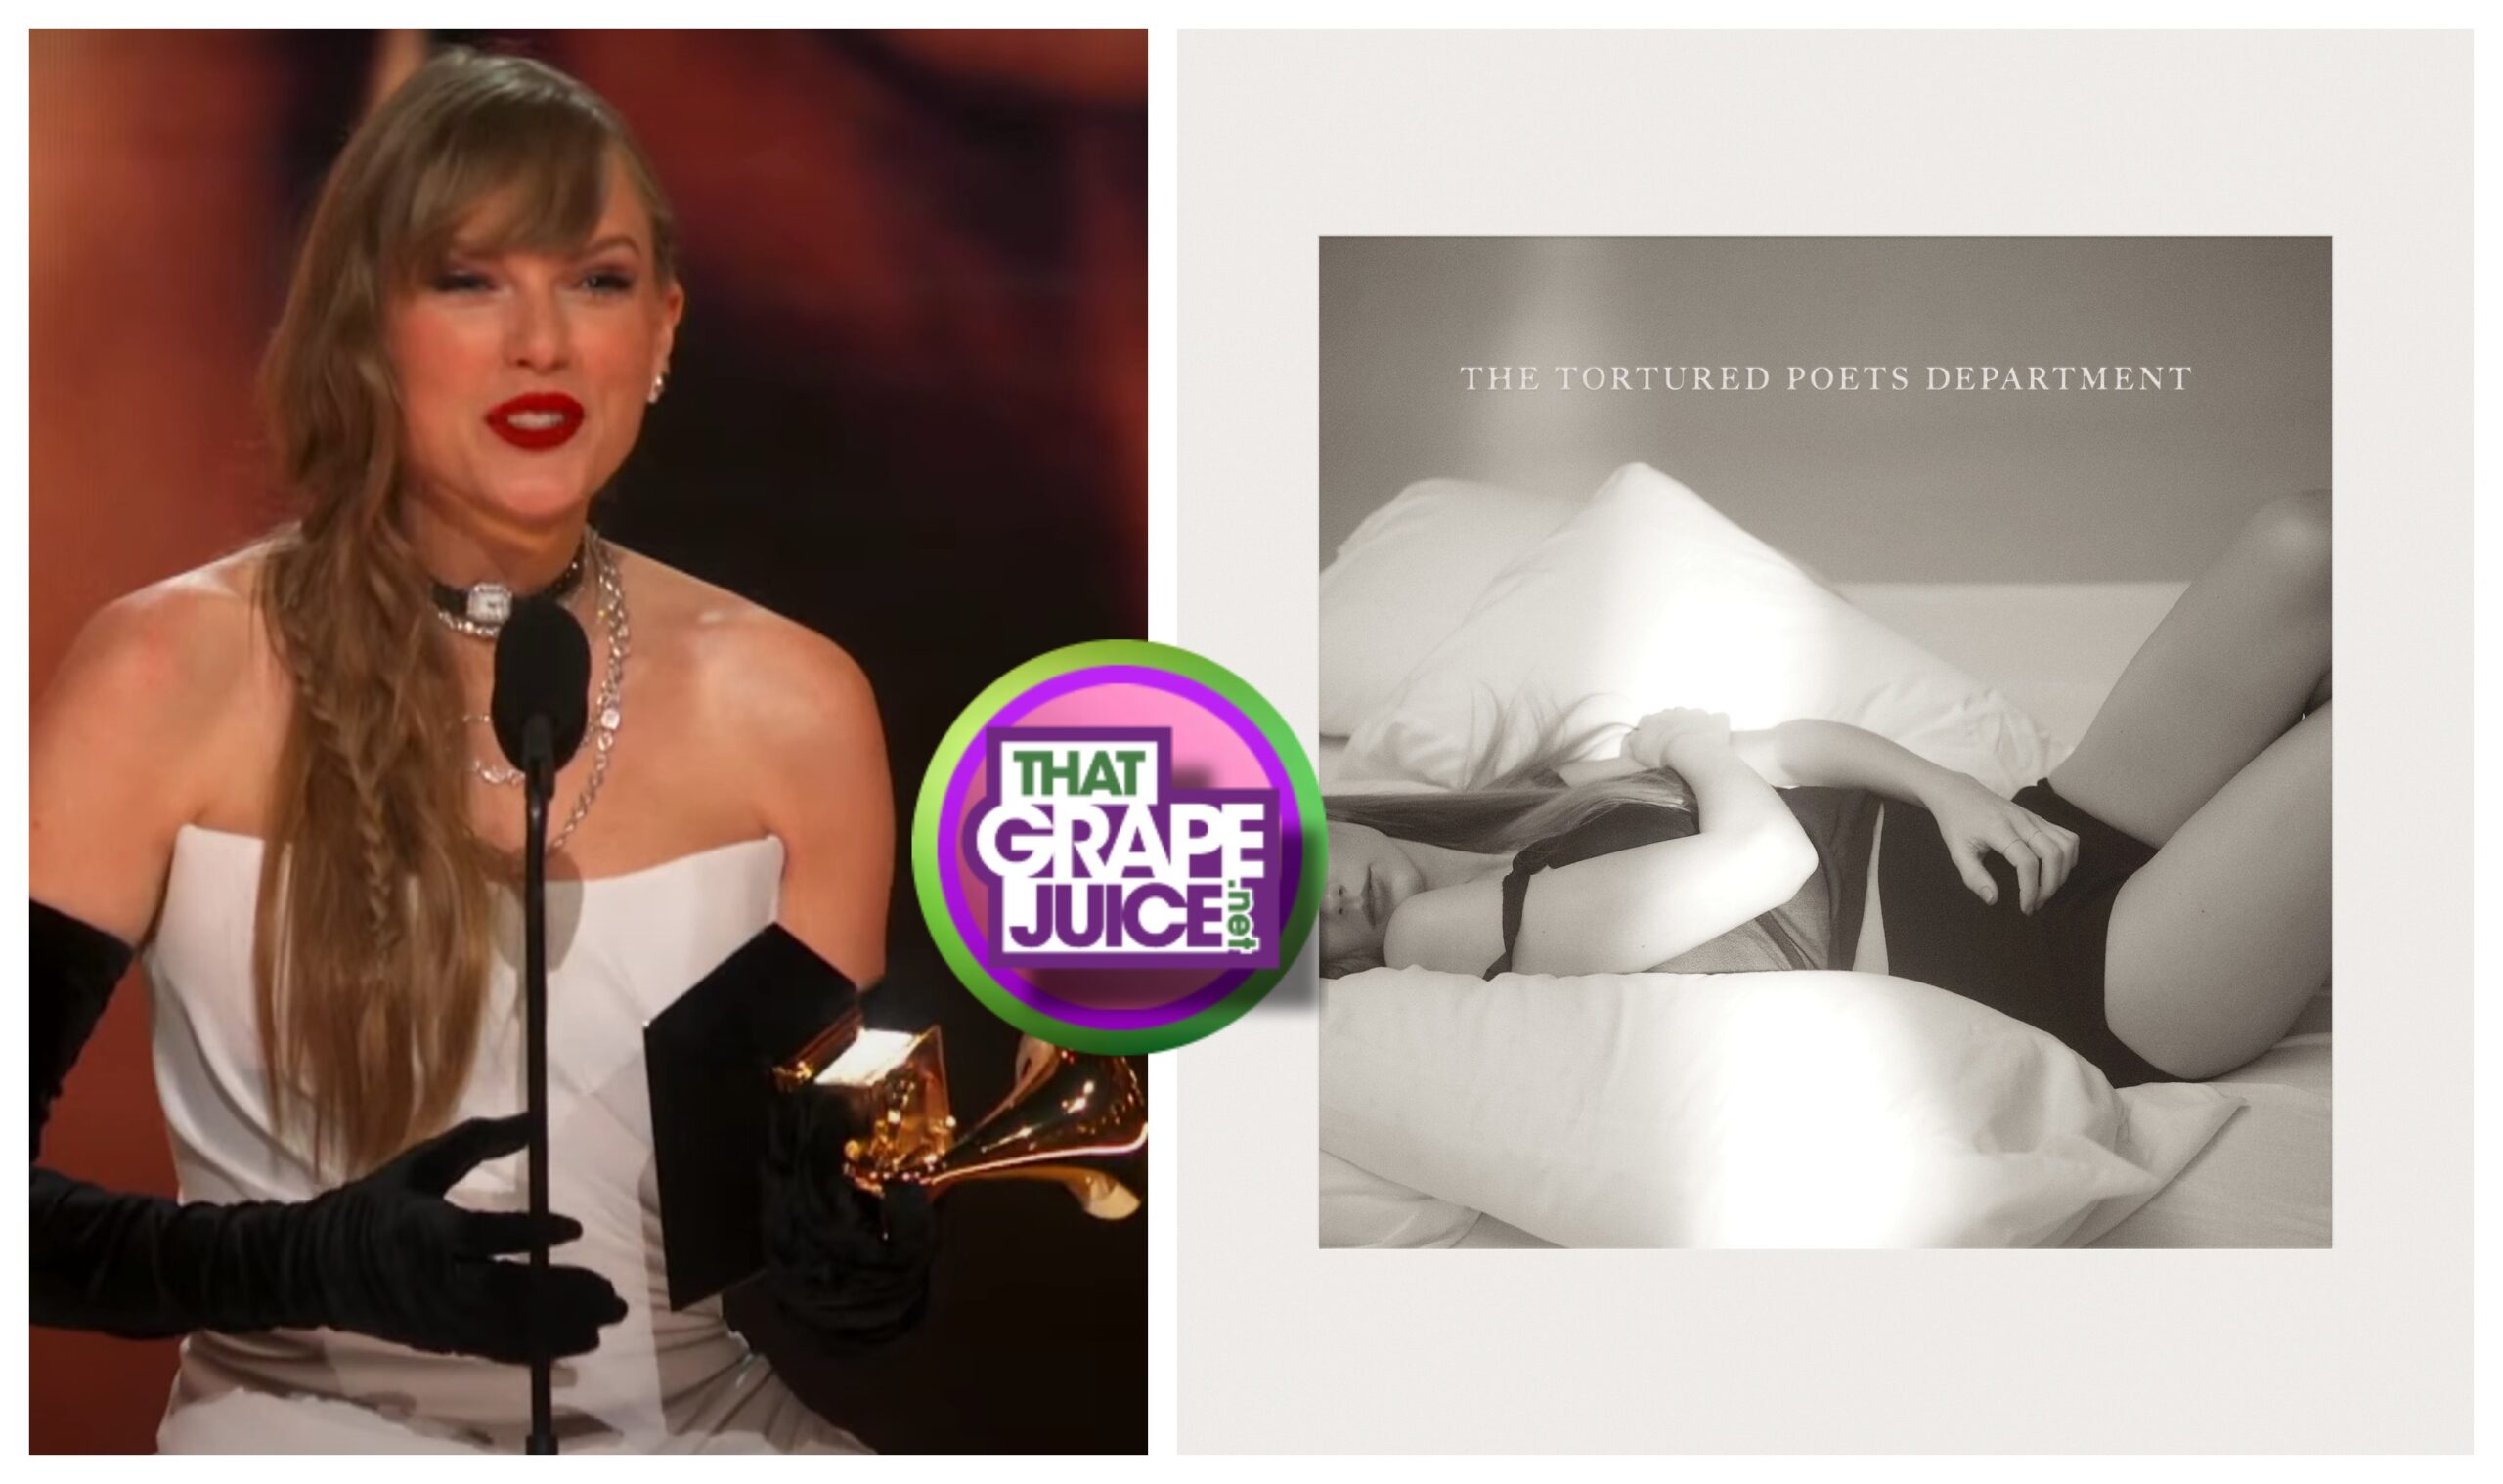 Surprise! Taylor Swift Announces New Album ‘The Tortured Poets Department’ at the GRAMMYs 2024